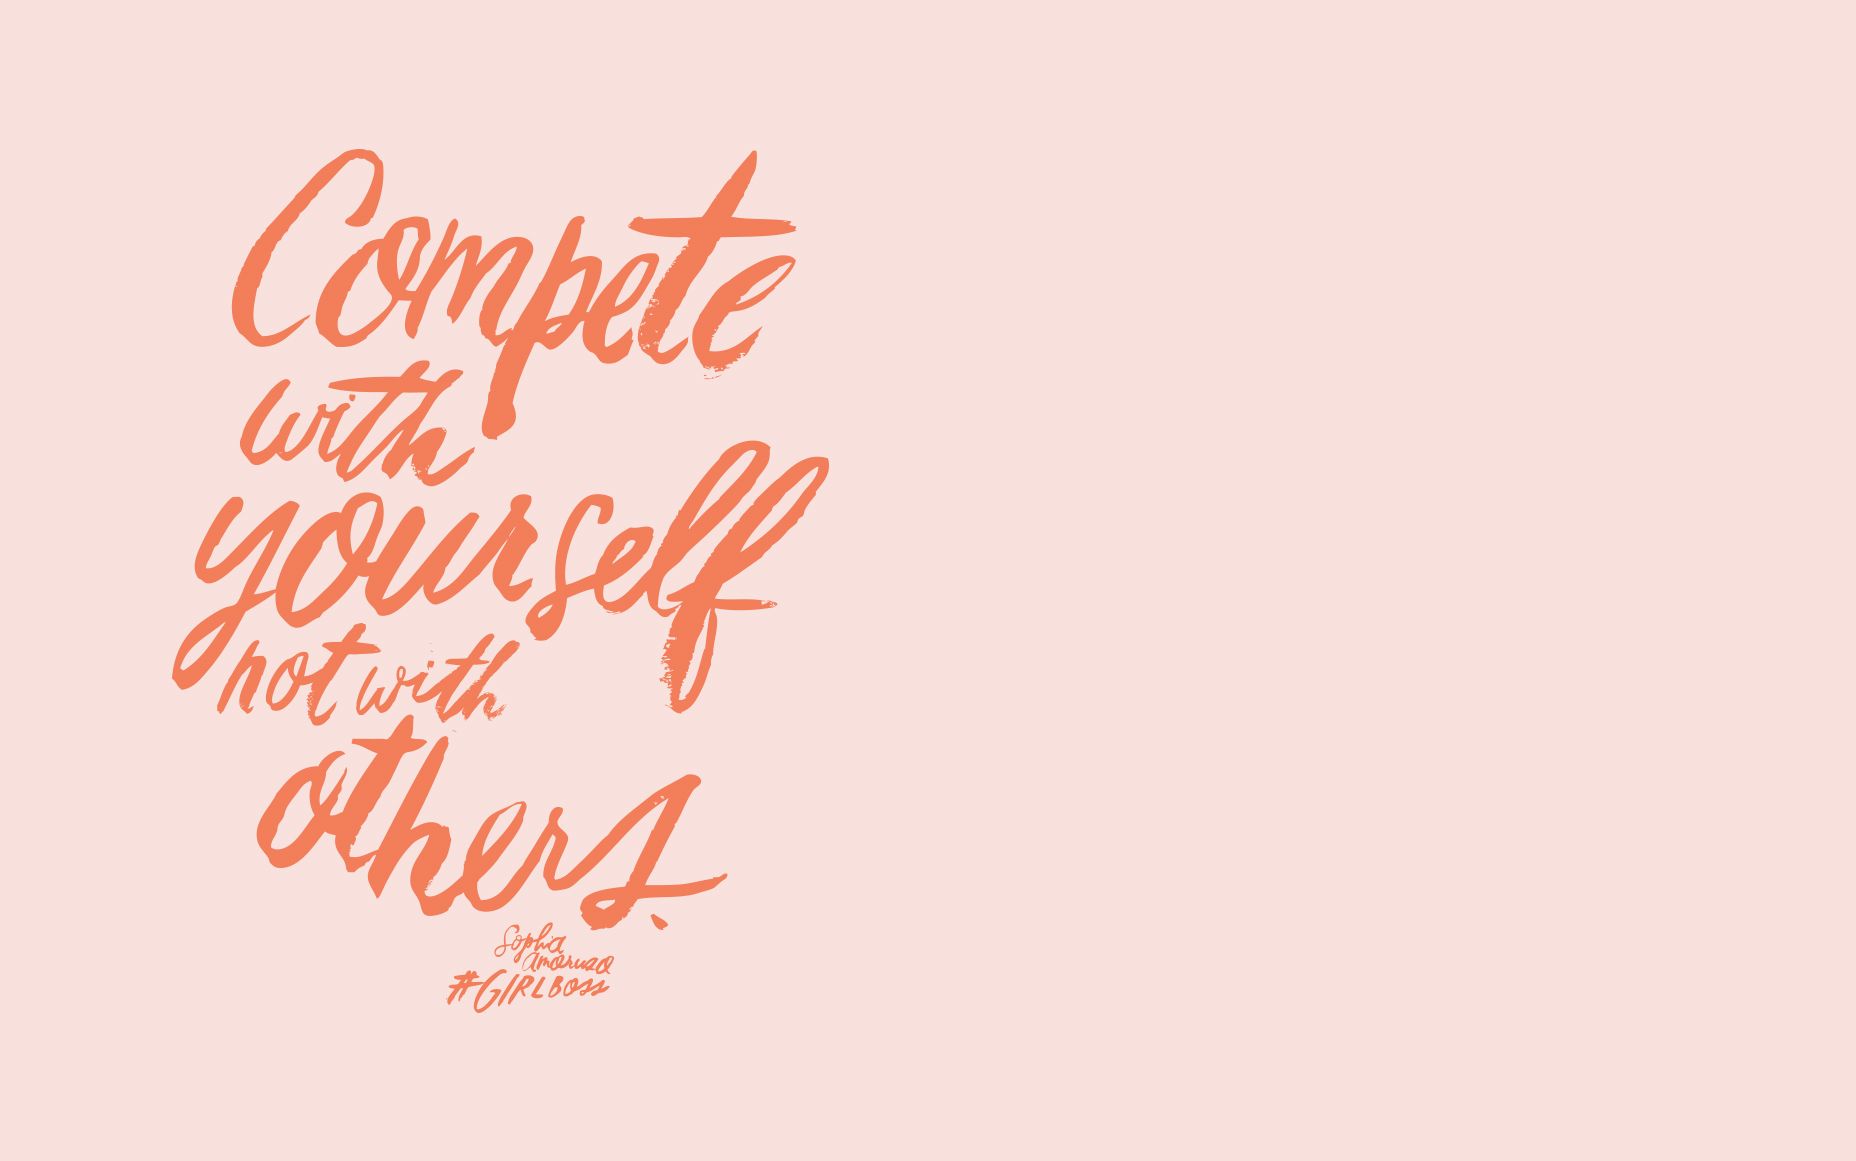 tumblr quote wallpapers for desktop